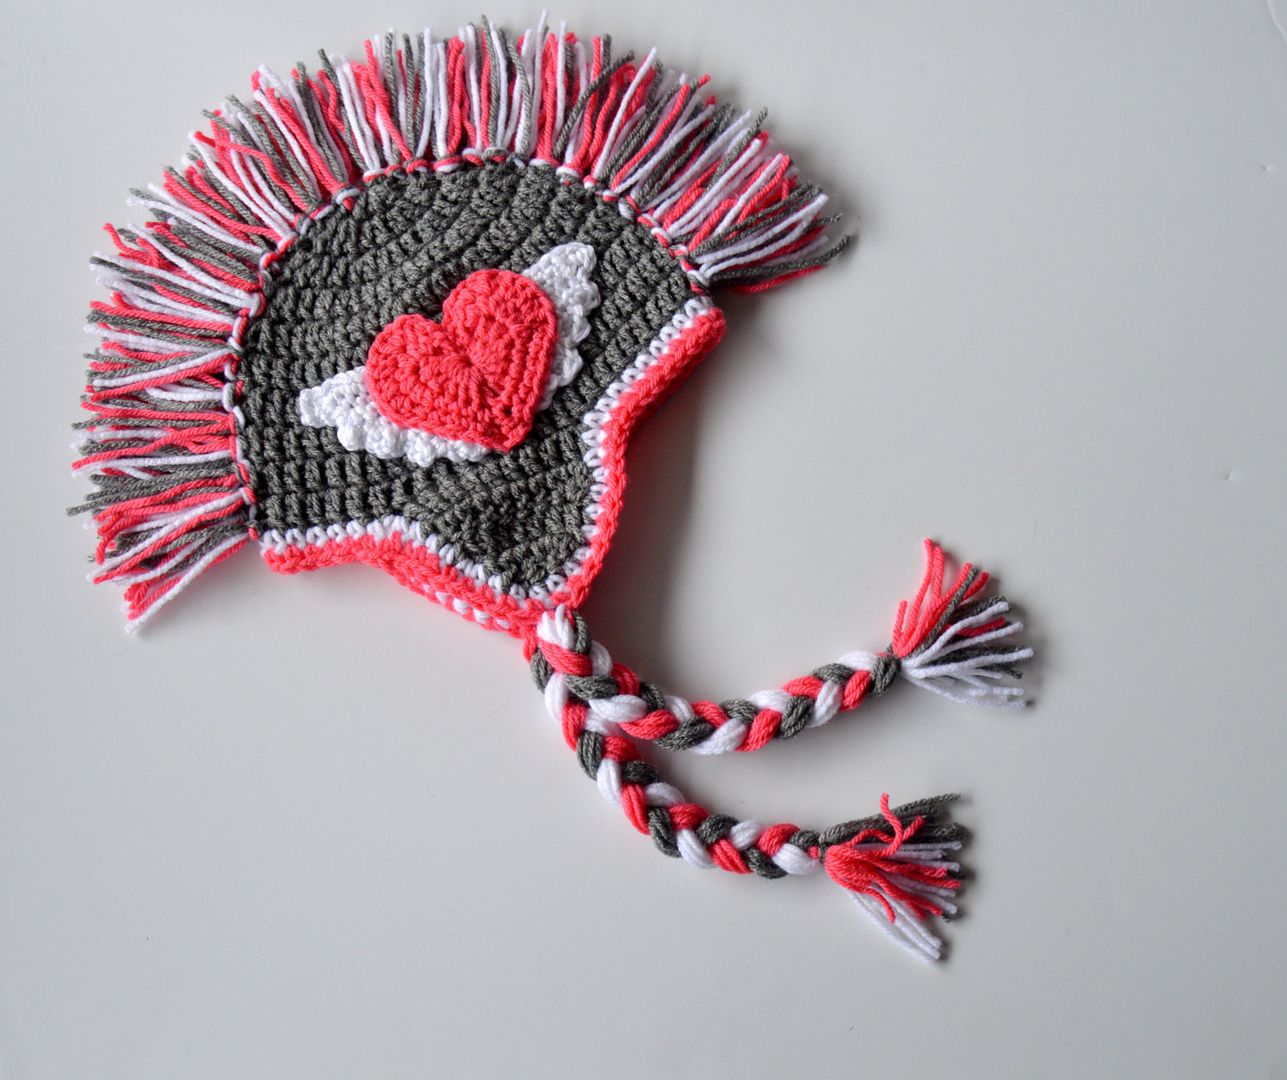 Winged heart mohawk snowboarder hat on Etsy | Cool Valentine's Day gift ideas for kids